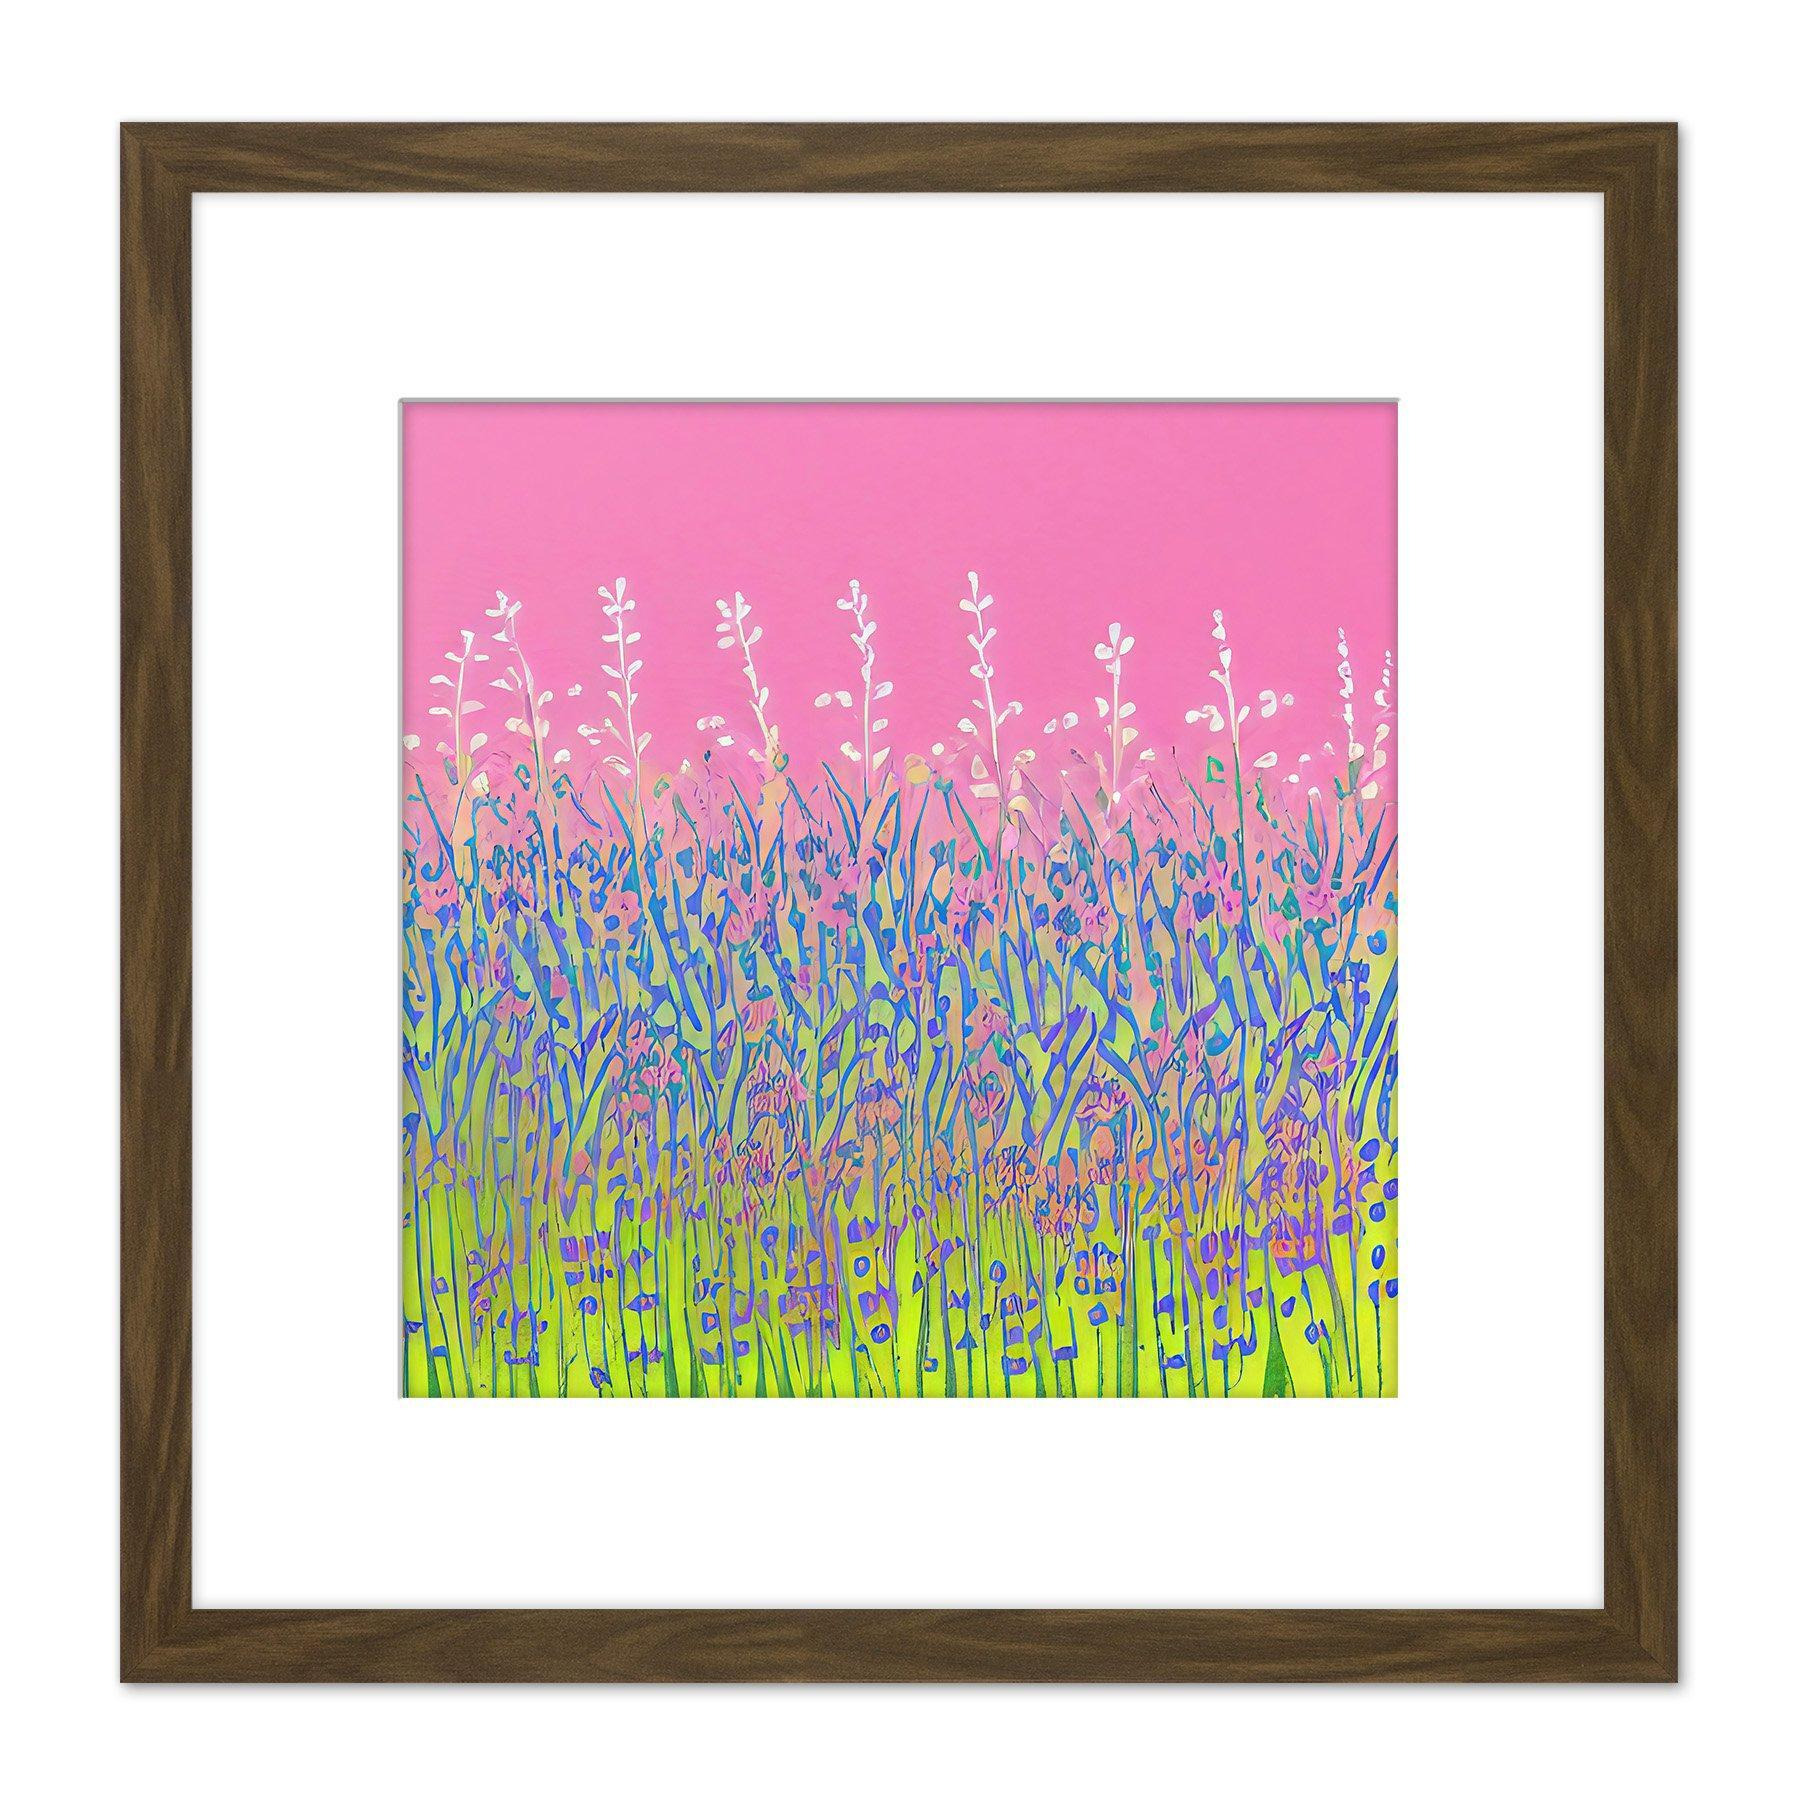 Abstract Floral Pink Violet Green Meadow Lavender Field Painting Square Wooden Framed Wall Art Print Picture 8X8 Inch - image 1